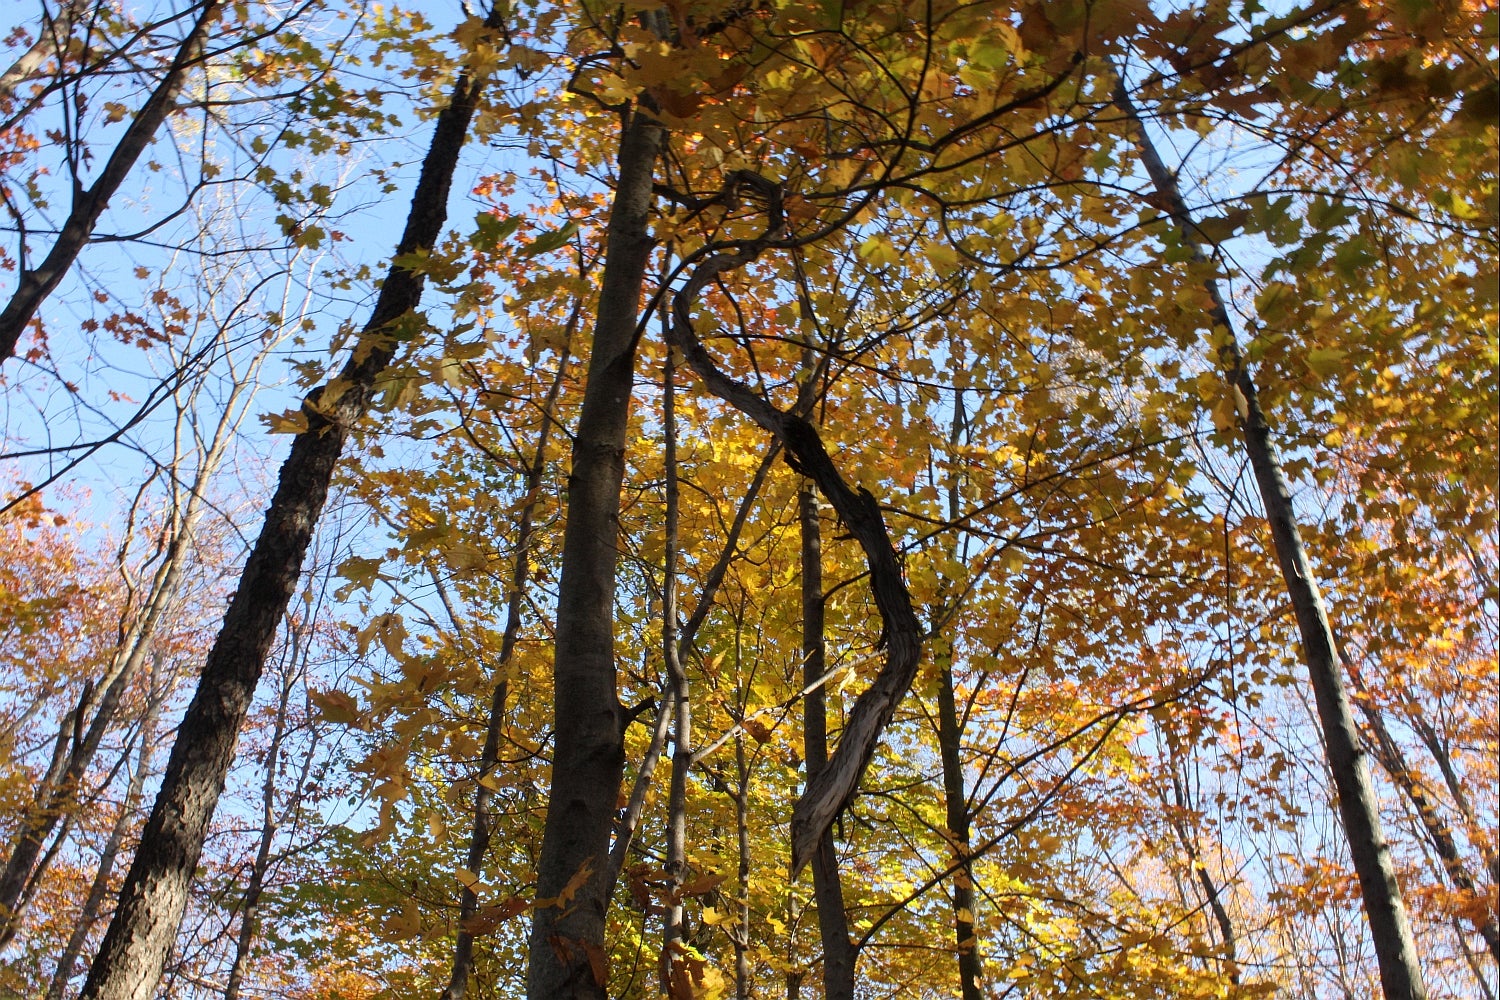 Look up into trees with yellow leaves against a blue sky.  A spiral shaped broken branch hangs from the trees.